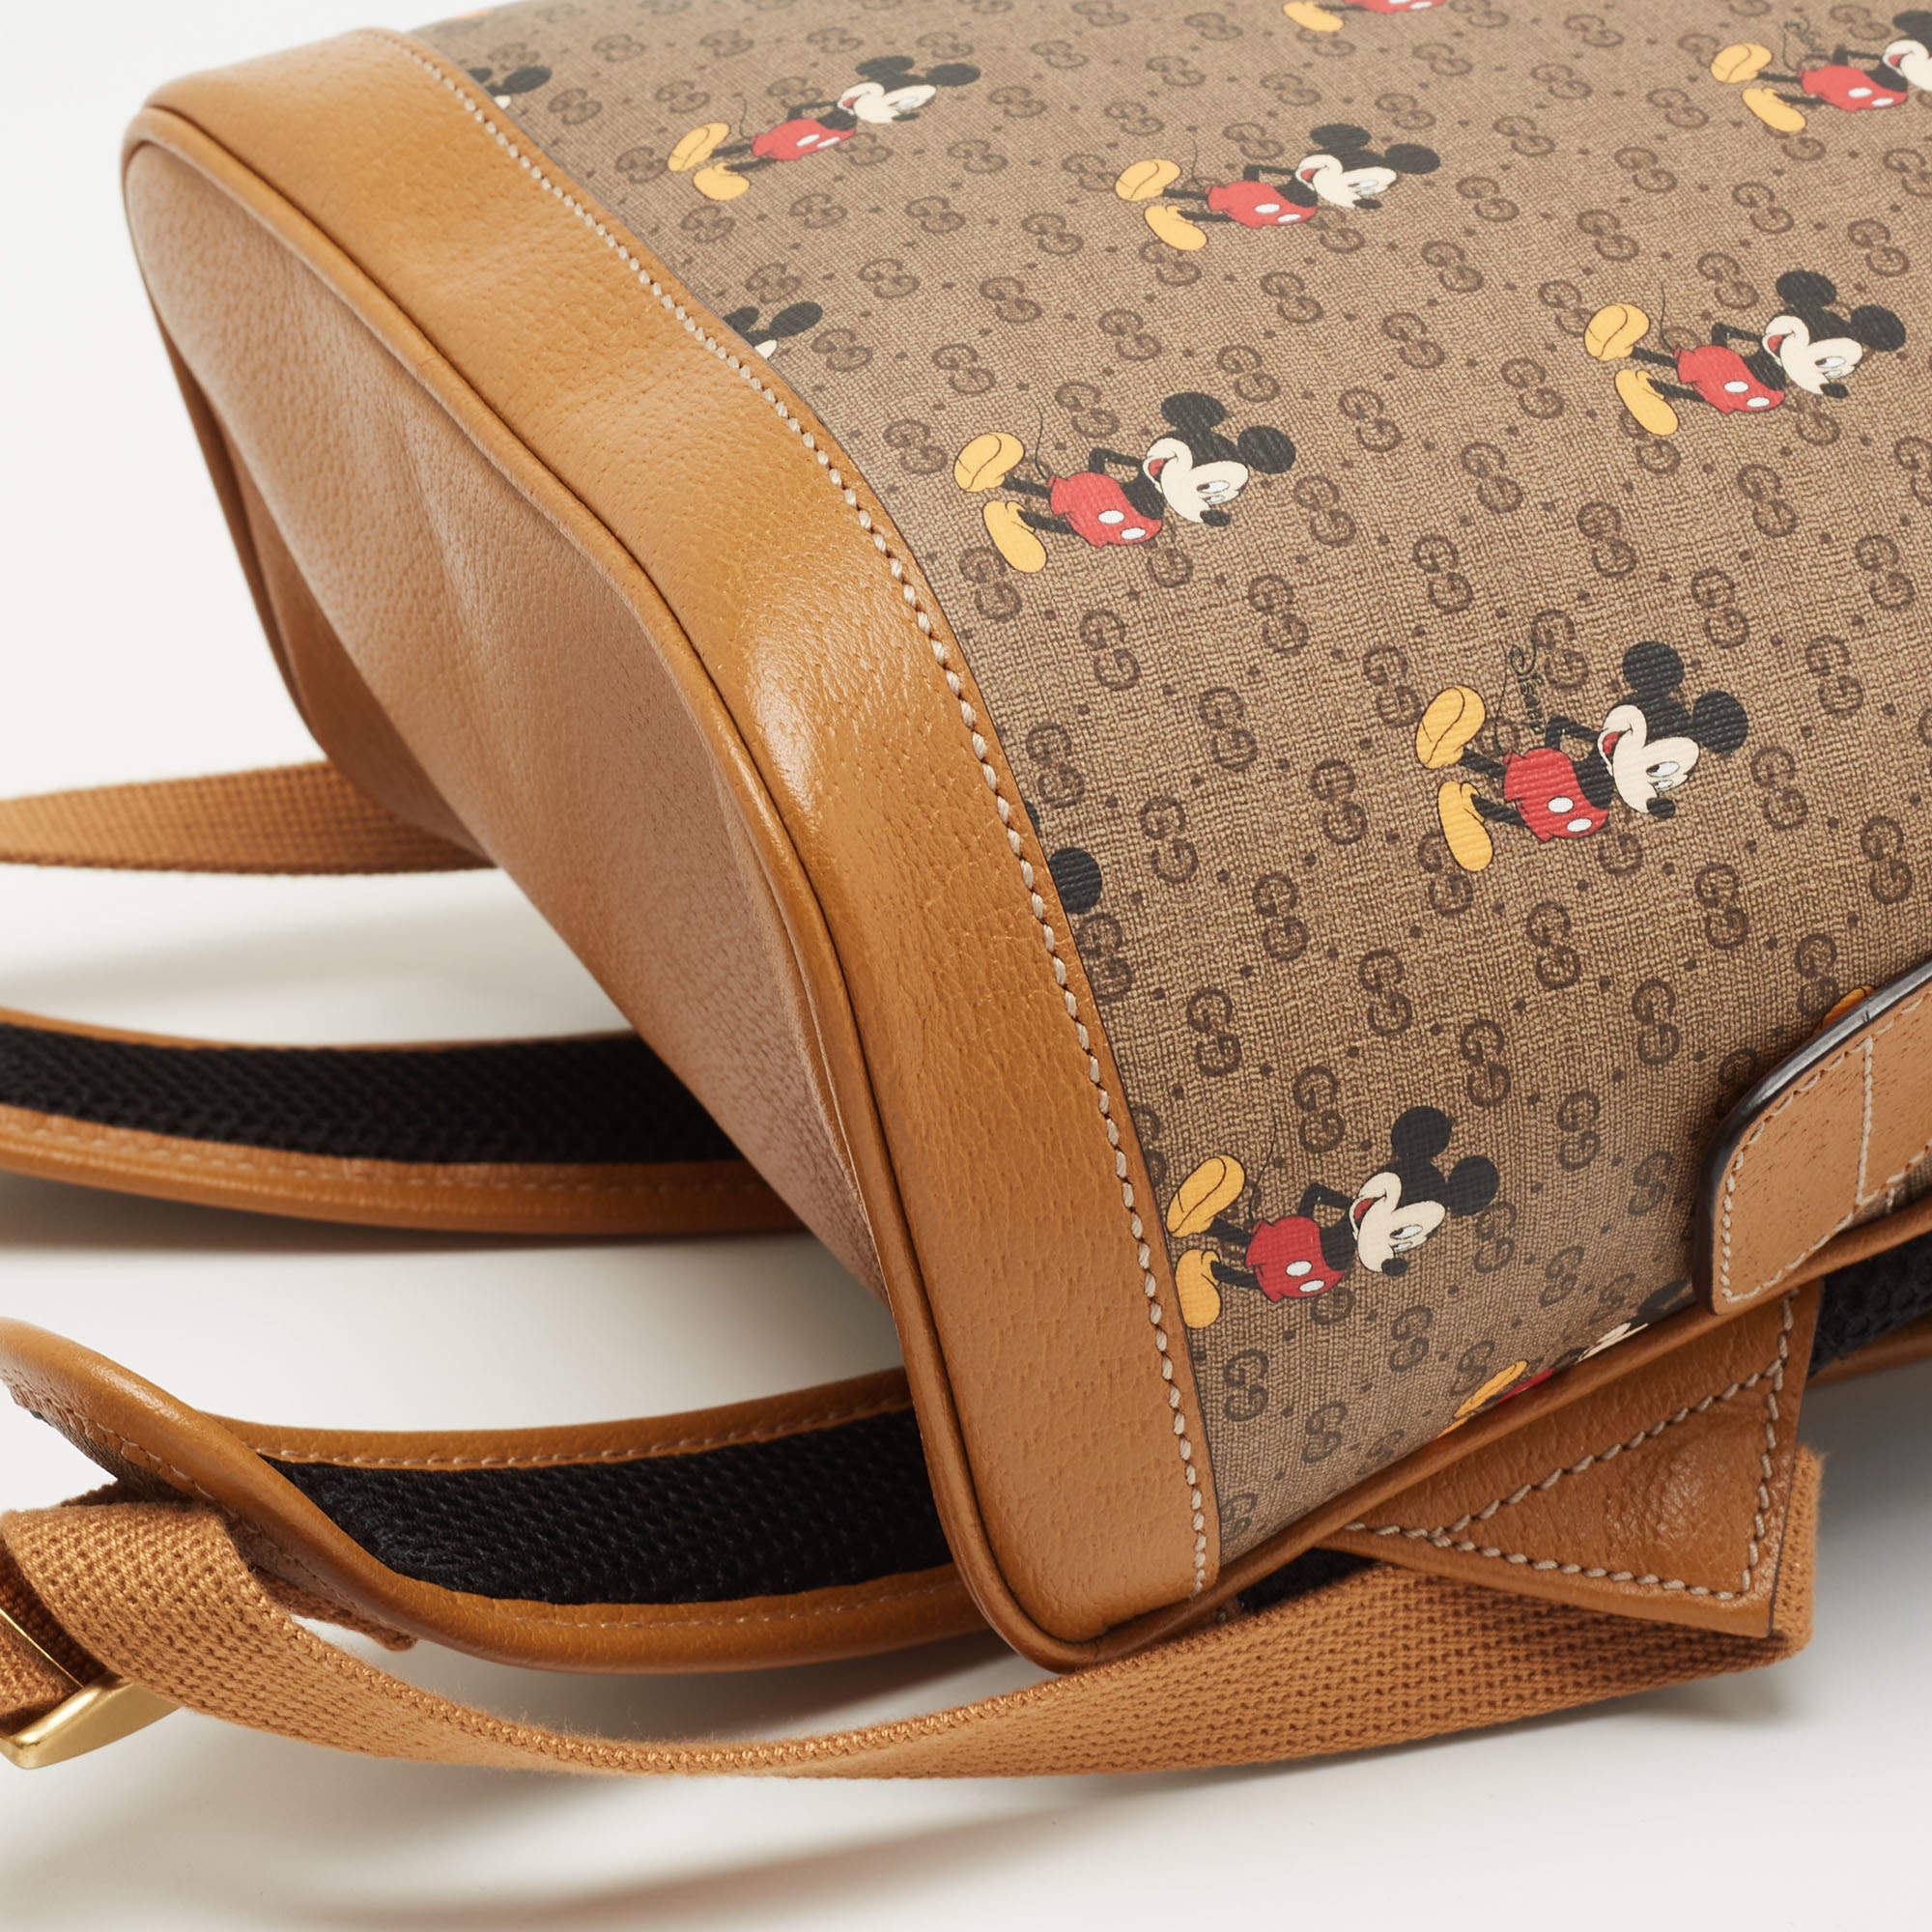 GUCCI Backpack Daypack 603898 Mickey backpack GG Supreme Canvas Brown –